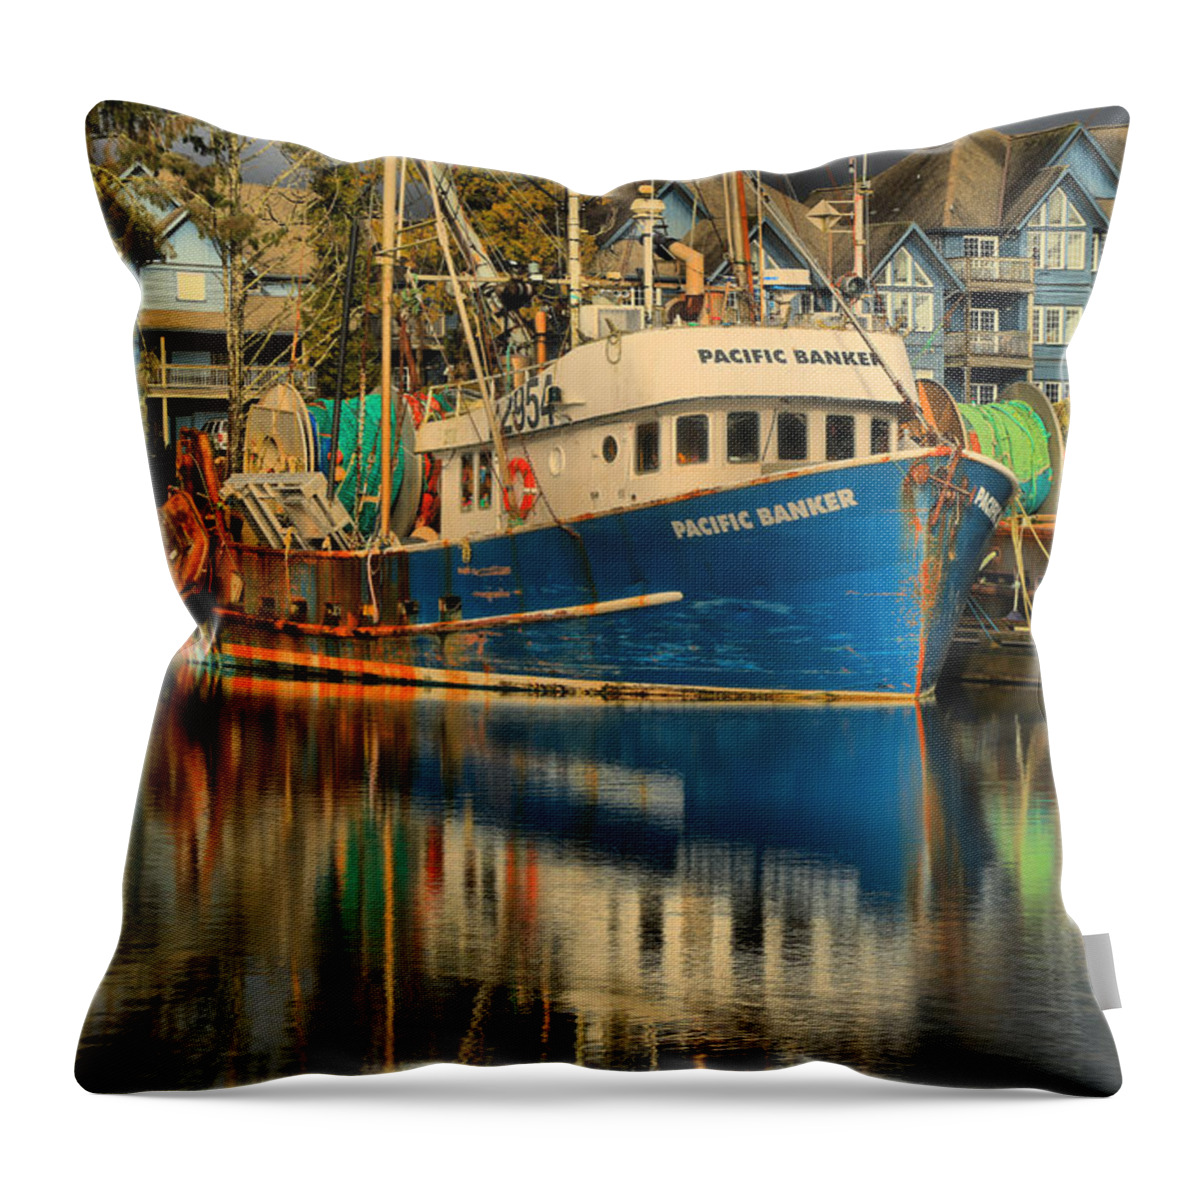 Pacific Banker Throw Pillow featuring the photograph The Pacific Banker by Adam Jewell